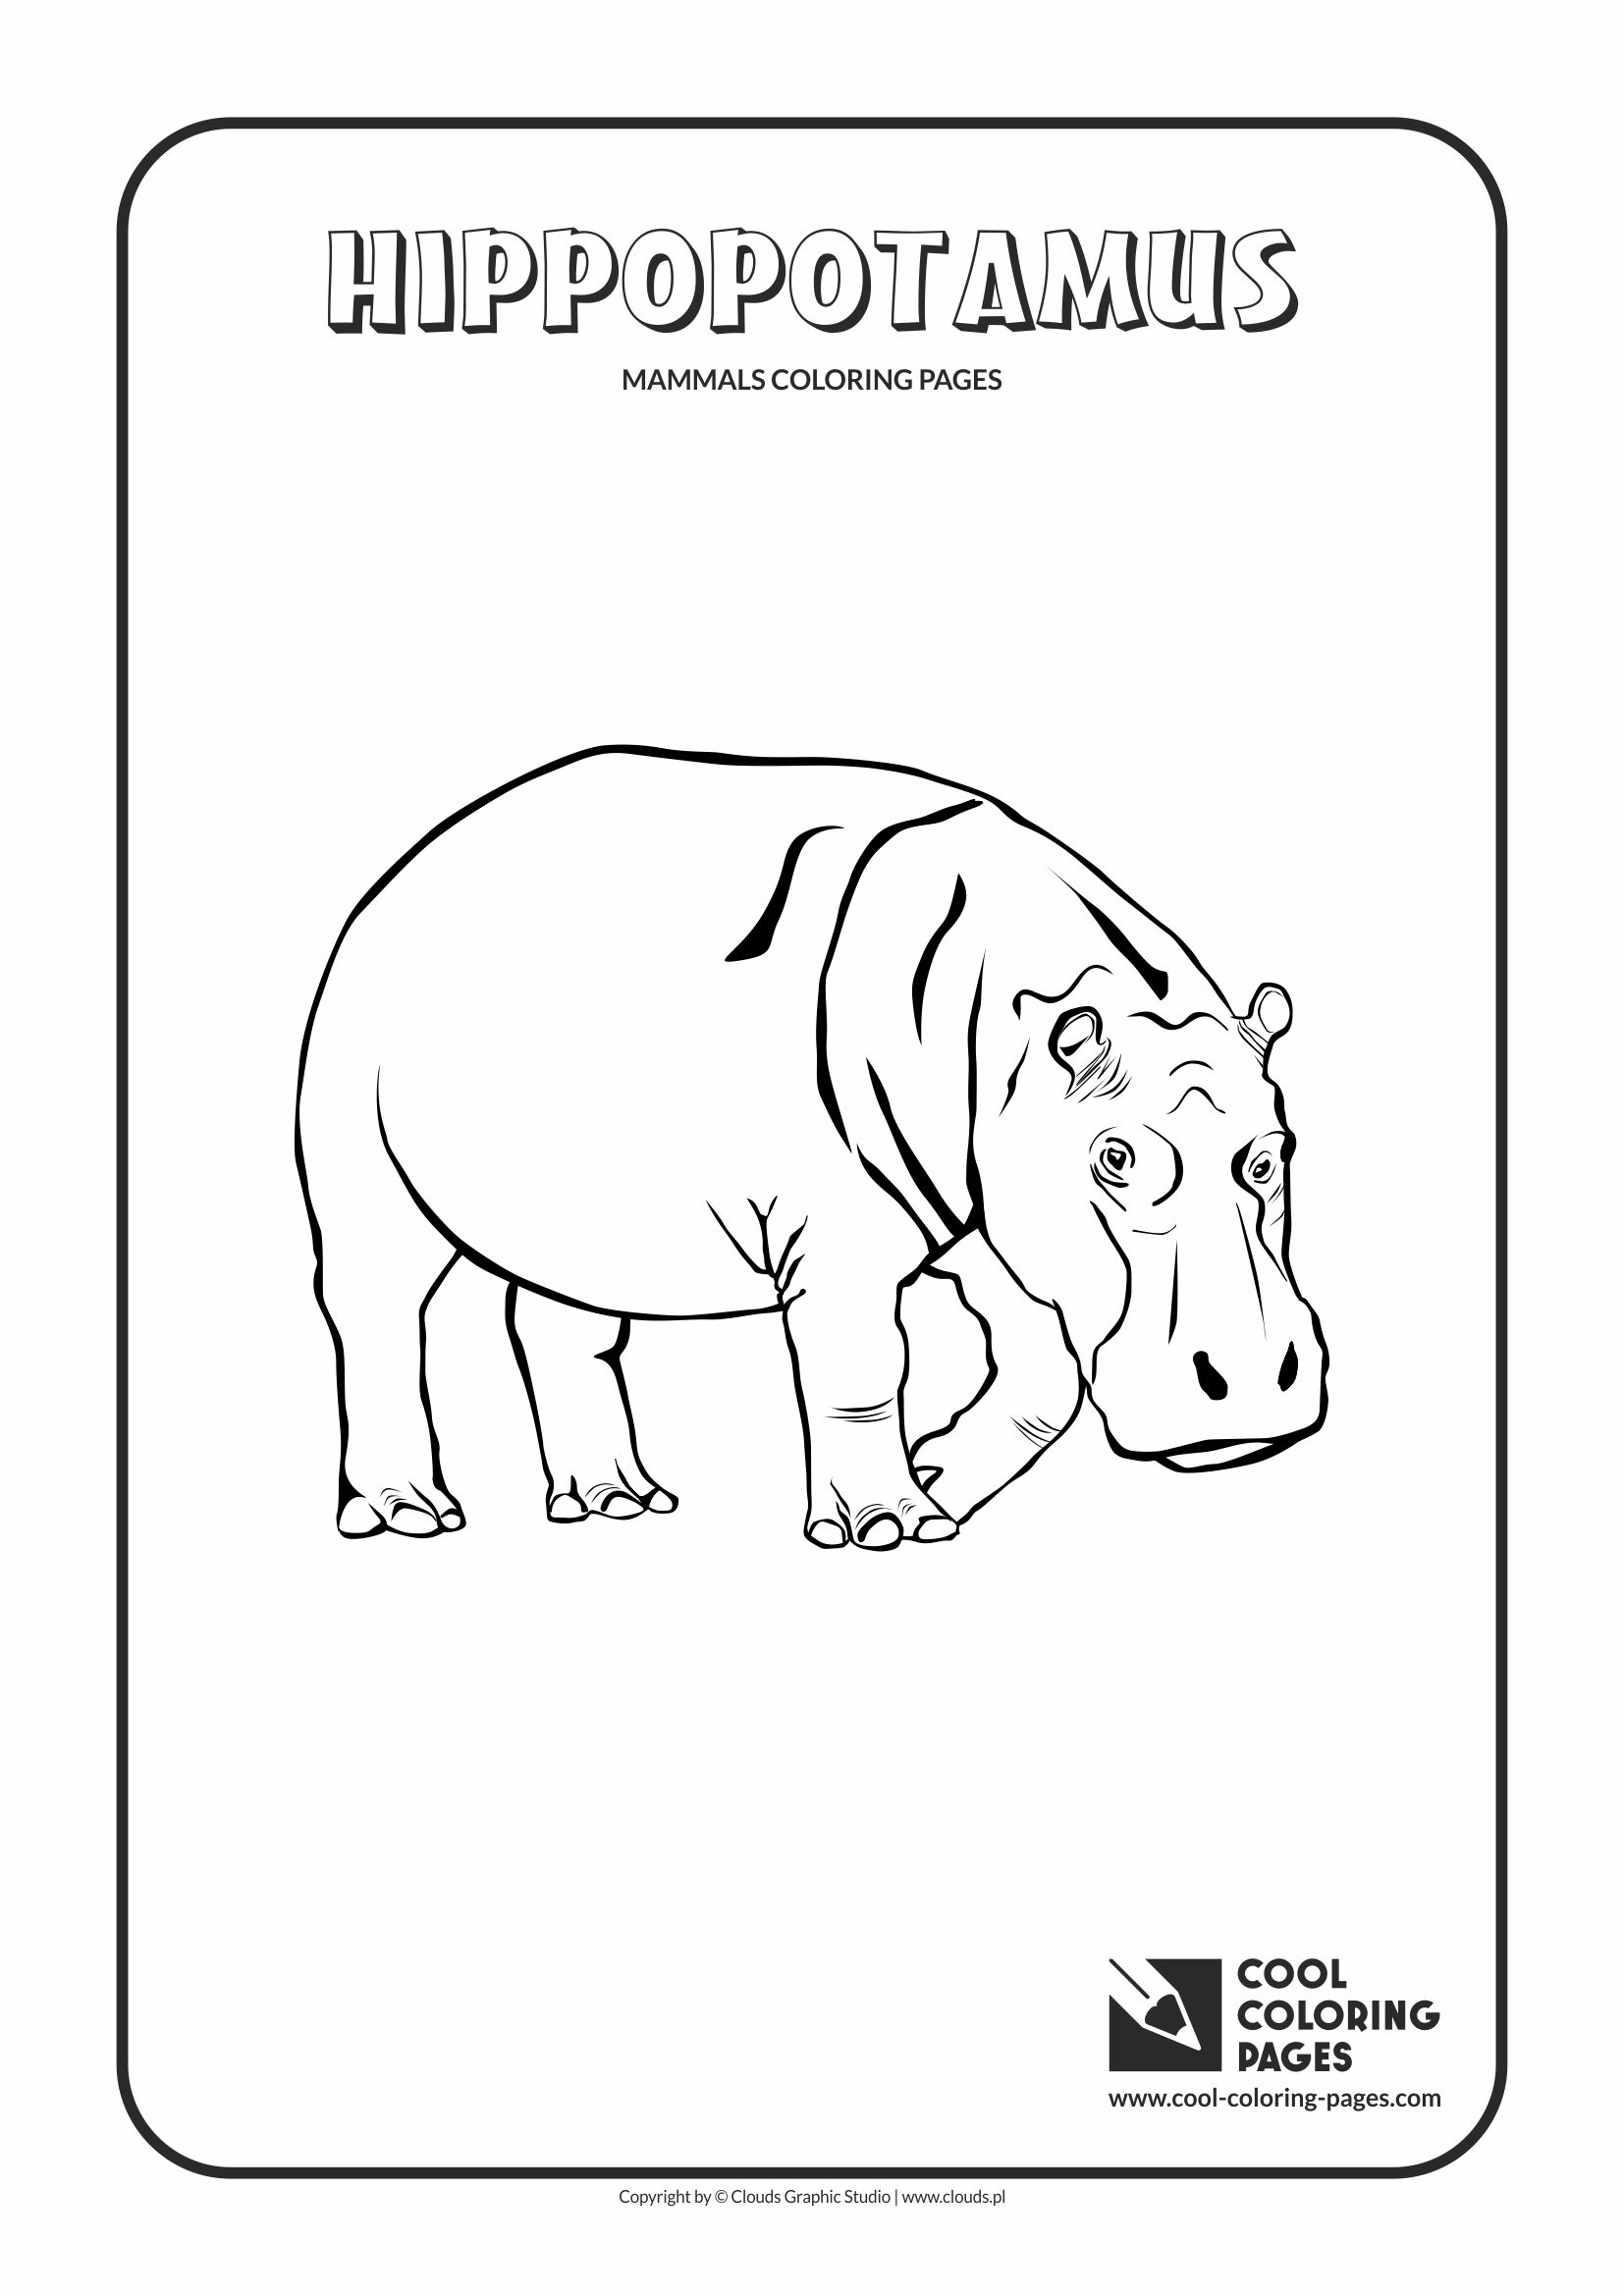 Cool Coloring Pages - Animals / Hippopotamus / Coloring page with hippopotamus